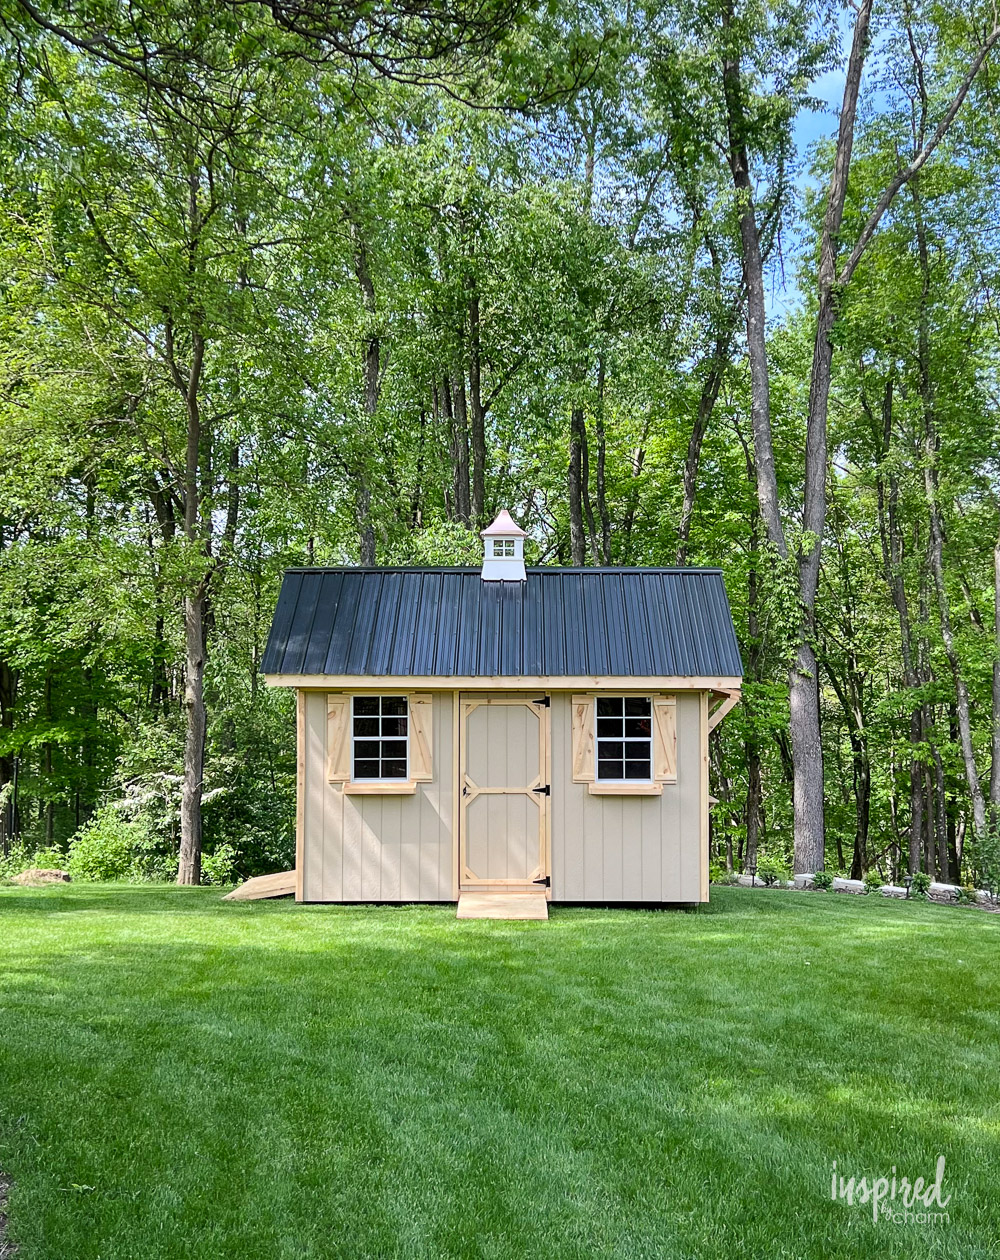 wood shed on top of green grass with trees behind it.